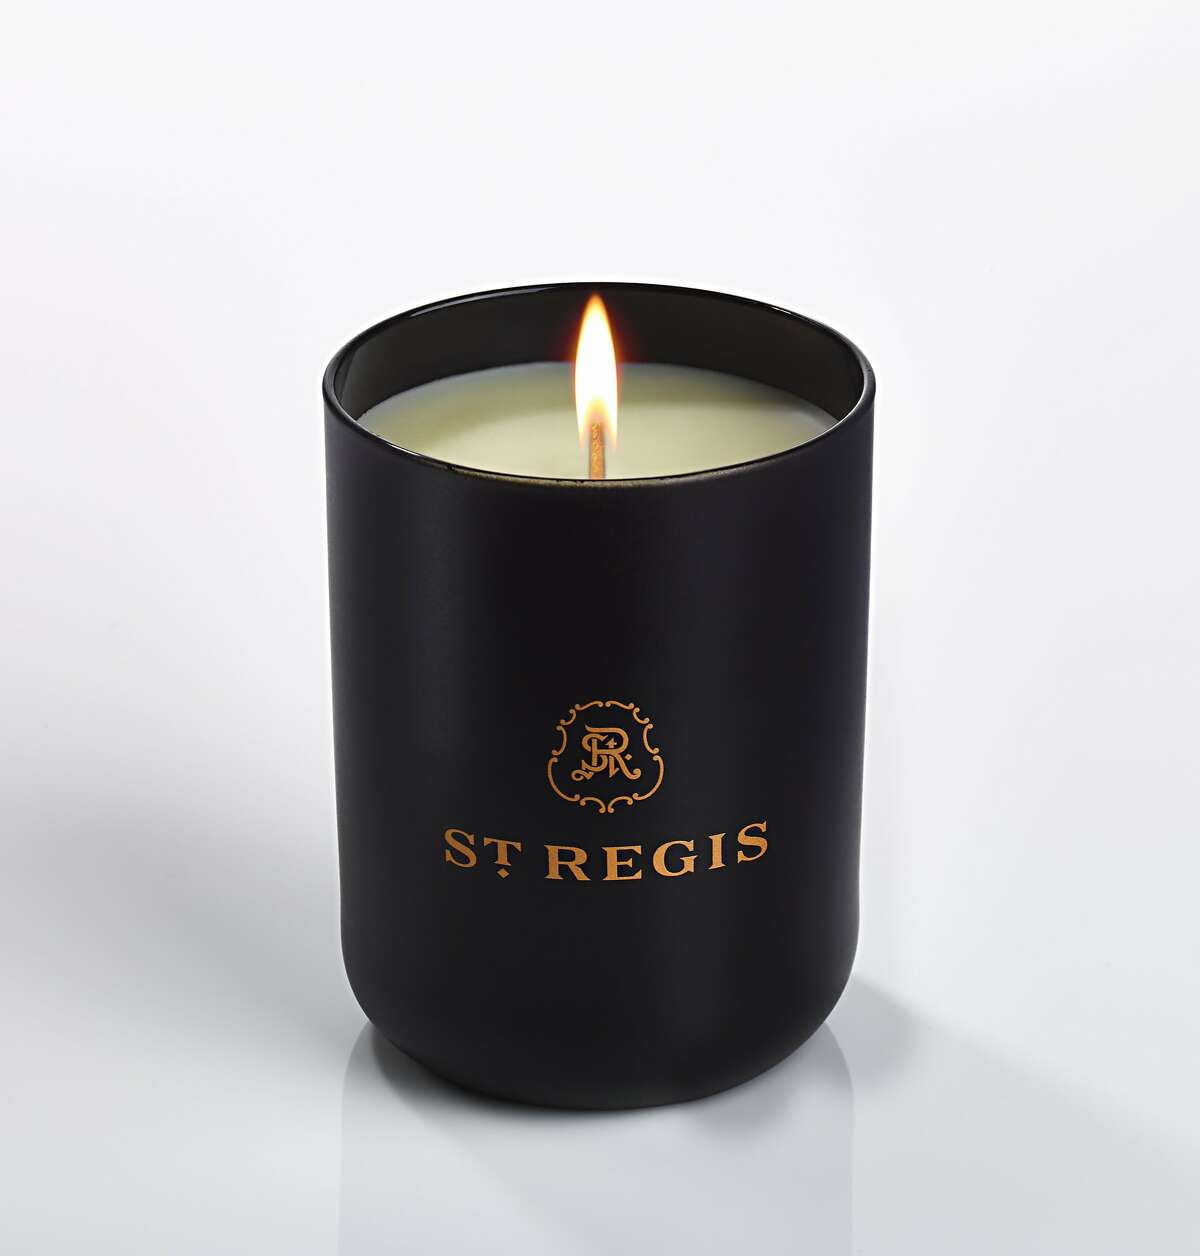 St. Regis Hotels and Resorts is introducing a new signature scent in October, in a candle called "Caroline's Four Hundred," that will be burned in all the company's 34 lobbies. The fragrance name is a reference to the matriarch of the family that founded the hotels, Caroline Astor, and the candle has notes of exotic wood, Champagne, roses, and green stems. Available for $80 at www.stregis.com/boutique in October, 2015.